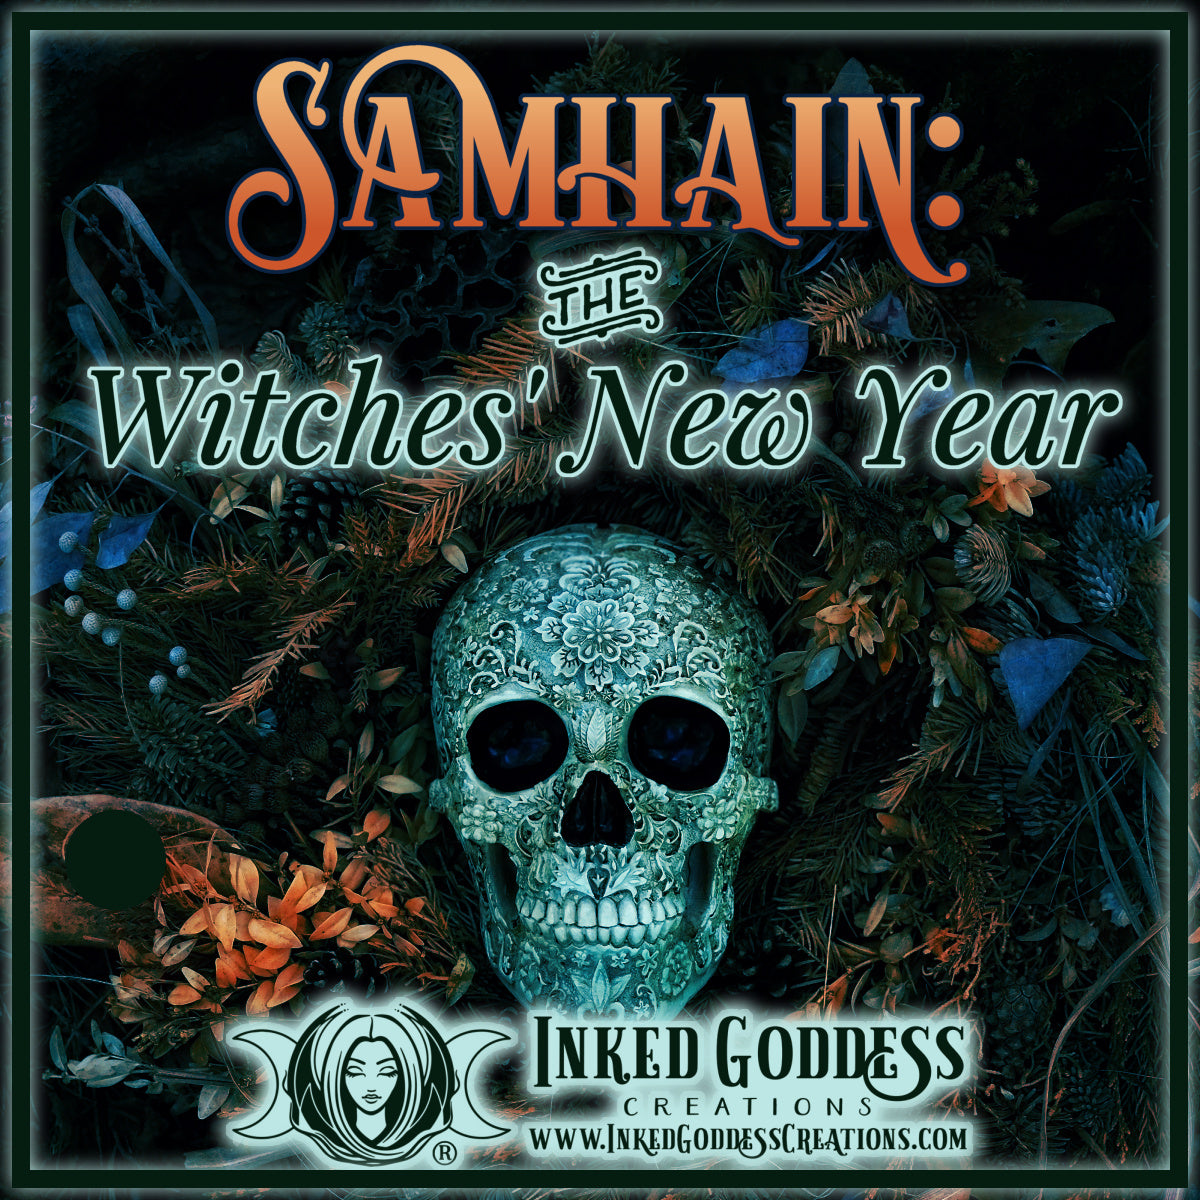 Samhain: The Witches’ New Year